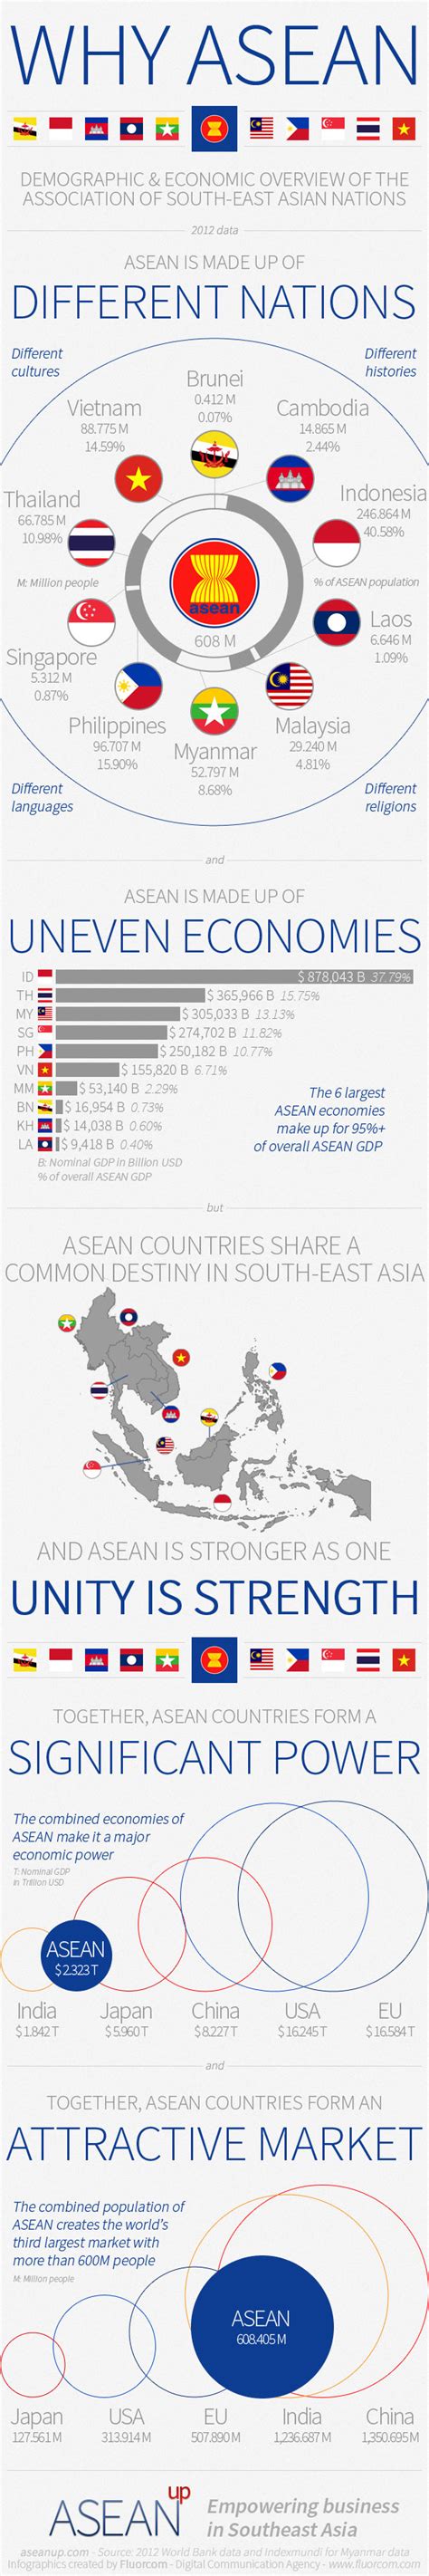 asean infographic economy and demography asean up